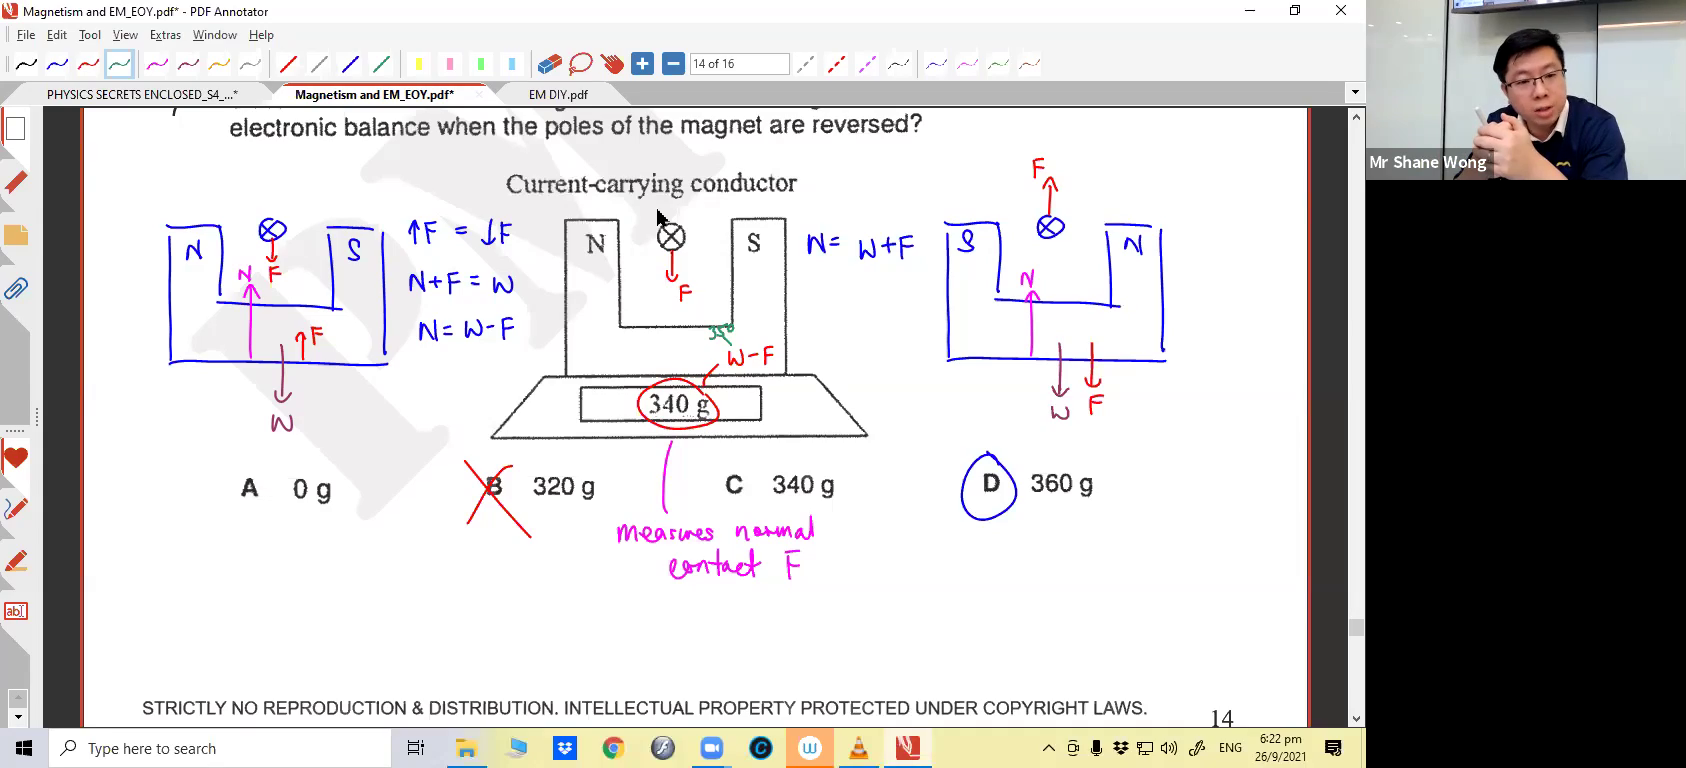 [ELECTROMAGNETISM] Magnetic Force on a Current Carrying Conductor in a Magnetic Field